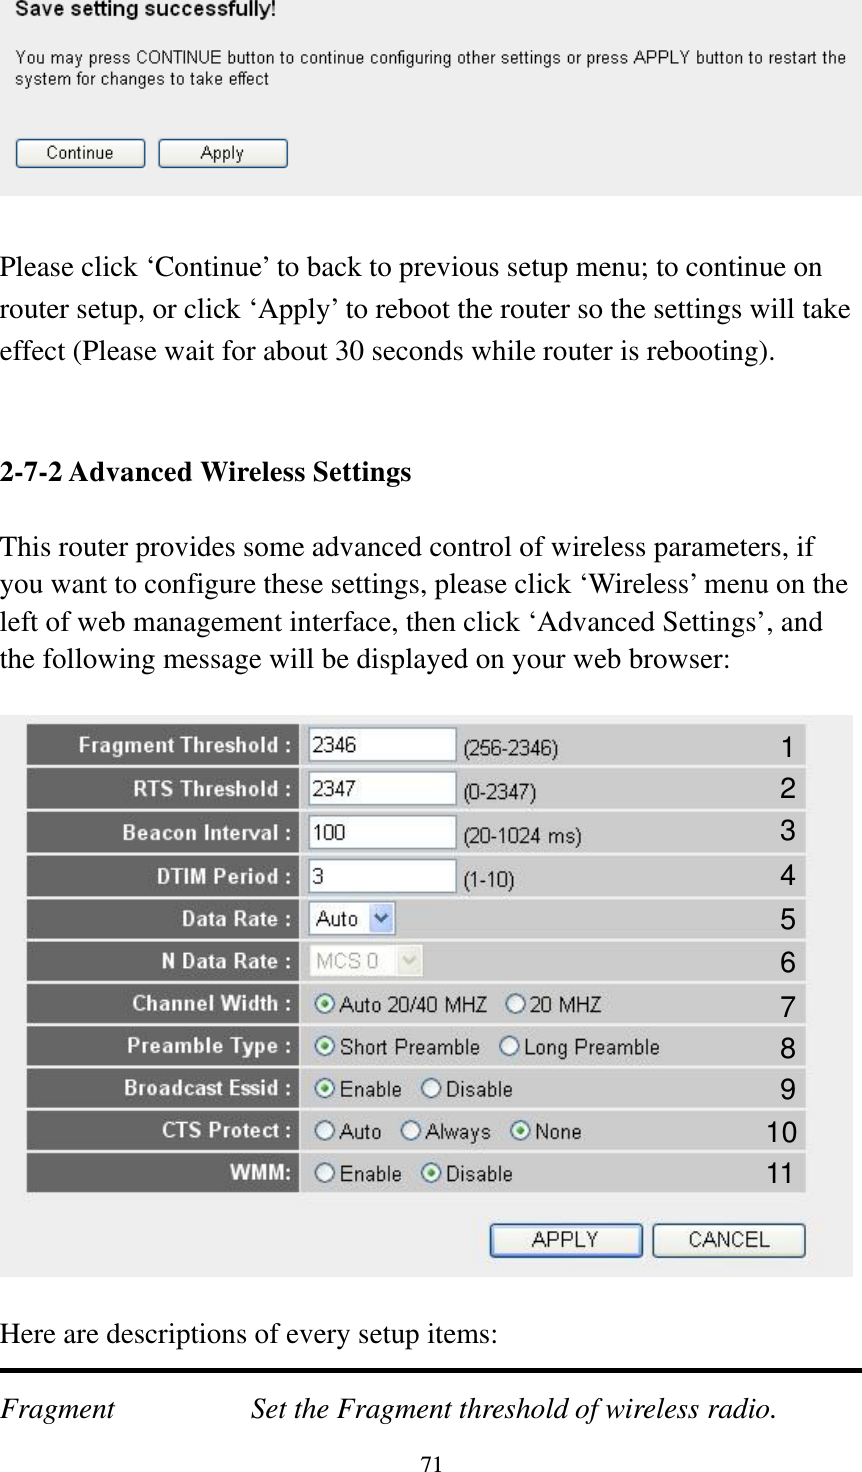 71   Please click ‘Continue’ to back to previous setup menu; to continue on router setup, or click ‘Apply’ to reboot the router so the settings will take effect (Please wait for about 30 seconds while router is rebooting).   2-7-2 Advanced Wireless Settings  This router provides some advanced control of wireless parameters, if you want to configure these settings, please click ‘Wireless’ menu on the left of web management interface, then click ‘Advanced Settings’, and the following message will be displayed on your web browser:    Here are descriptions of every setup items:  Fragment  Set the Fragment threshold of wireless radio.     1 2 3 4 5 7 8 6 9 10 11 